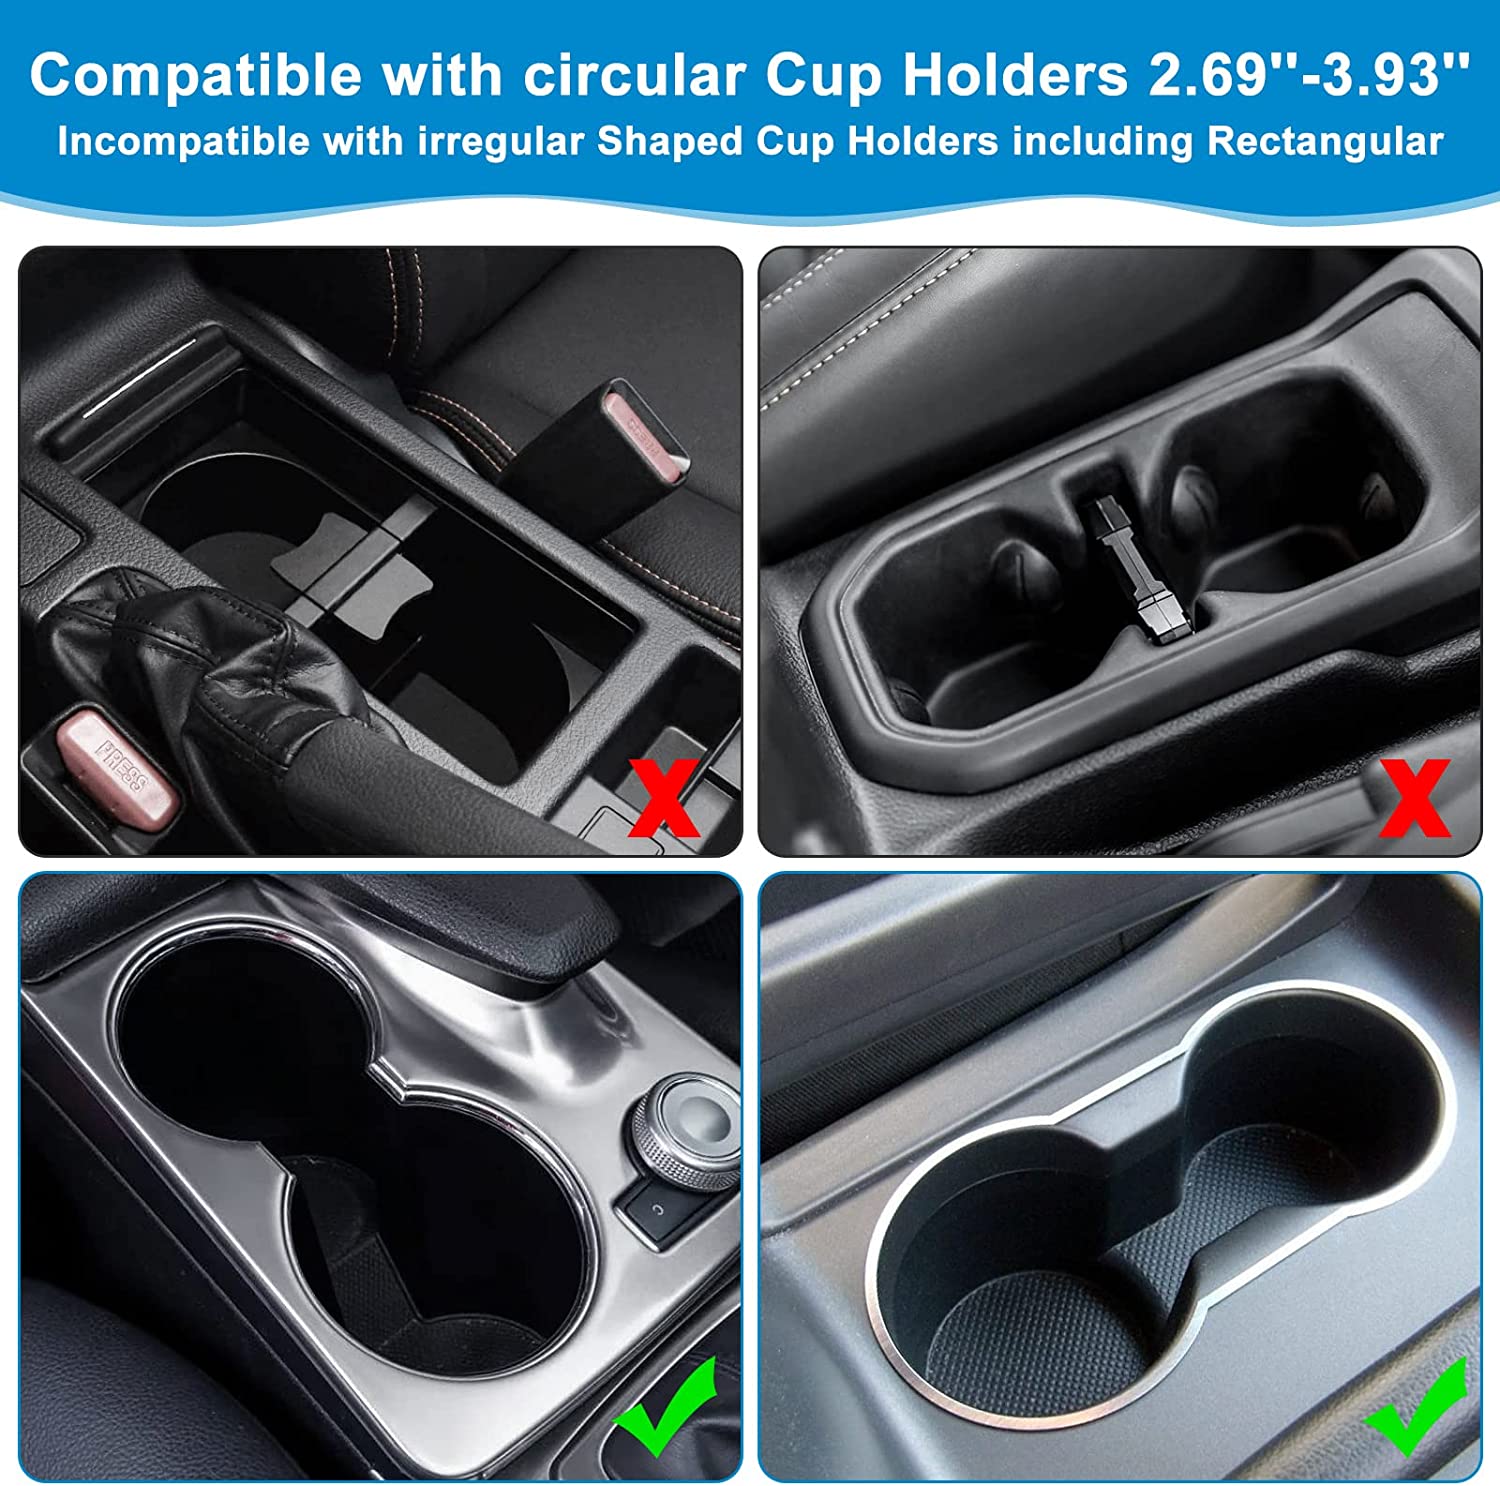 Car Cup Holder 2-in-1, Custom-Fit For Car, Car Cup Holder Expander Adapter with Adjustable Base, Car Cup Holder Expander Organizer with Phone Holder DLPF233